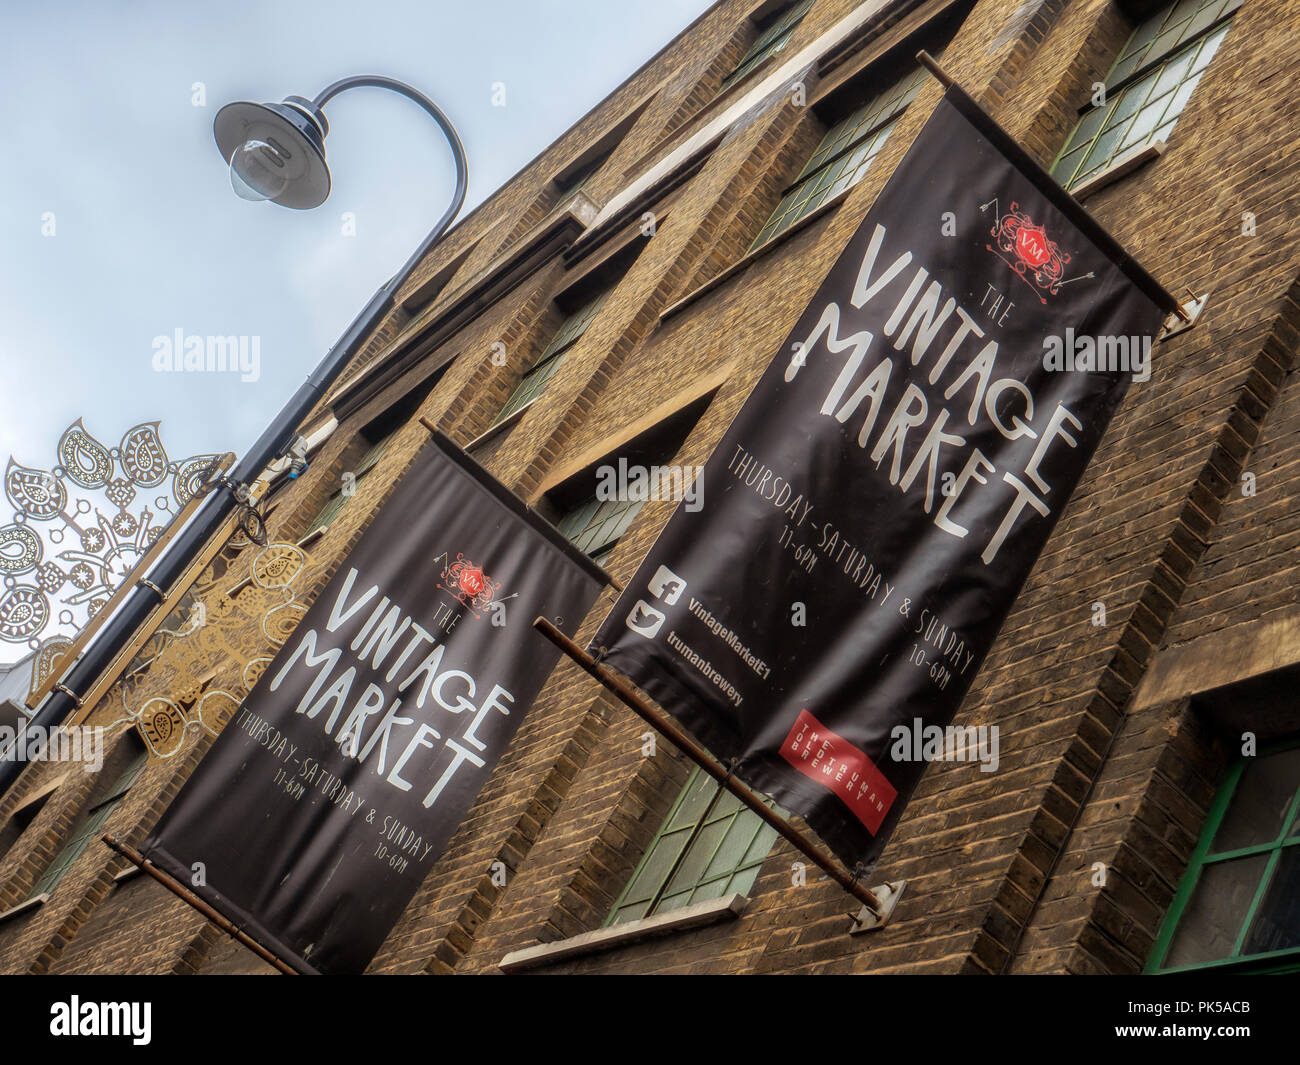 LONDON, UK - OCTOBER 11, 2015:  Signs for the Vintage Market (also known as Up market) in the Old Truman Brewery Building in Brick Lane Stock Photo